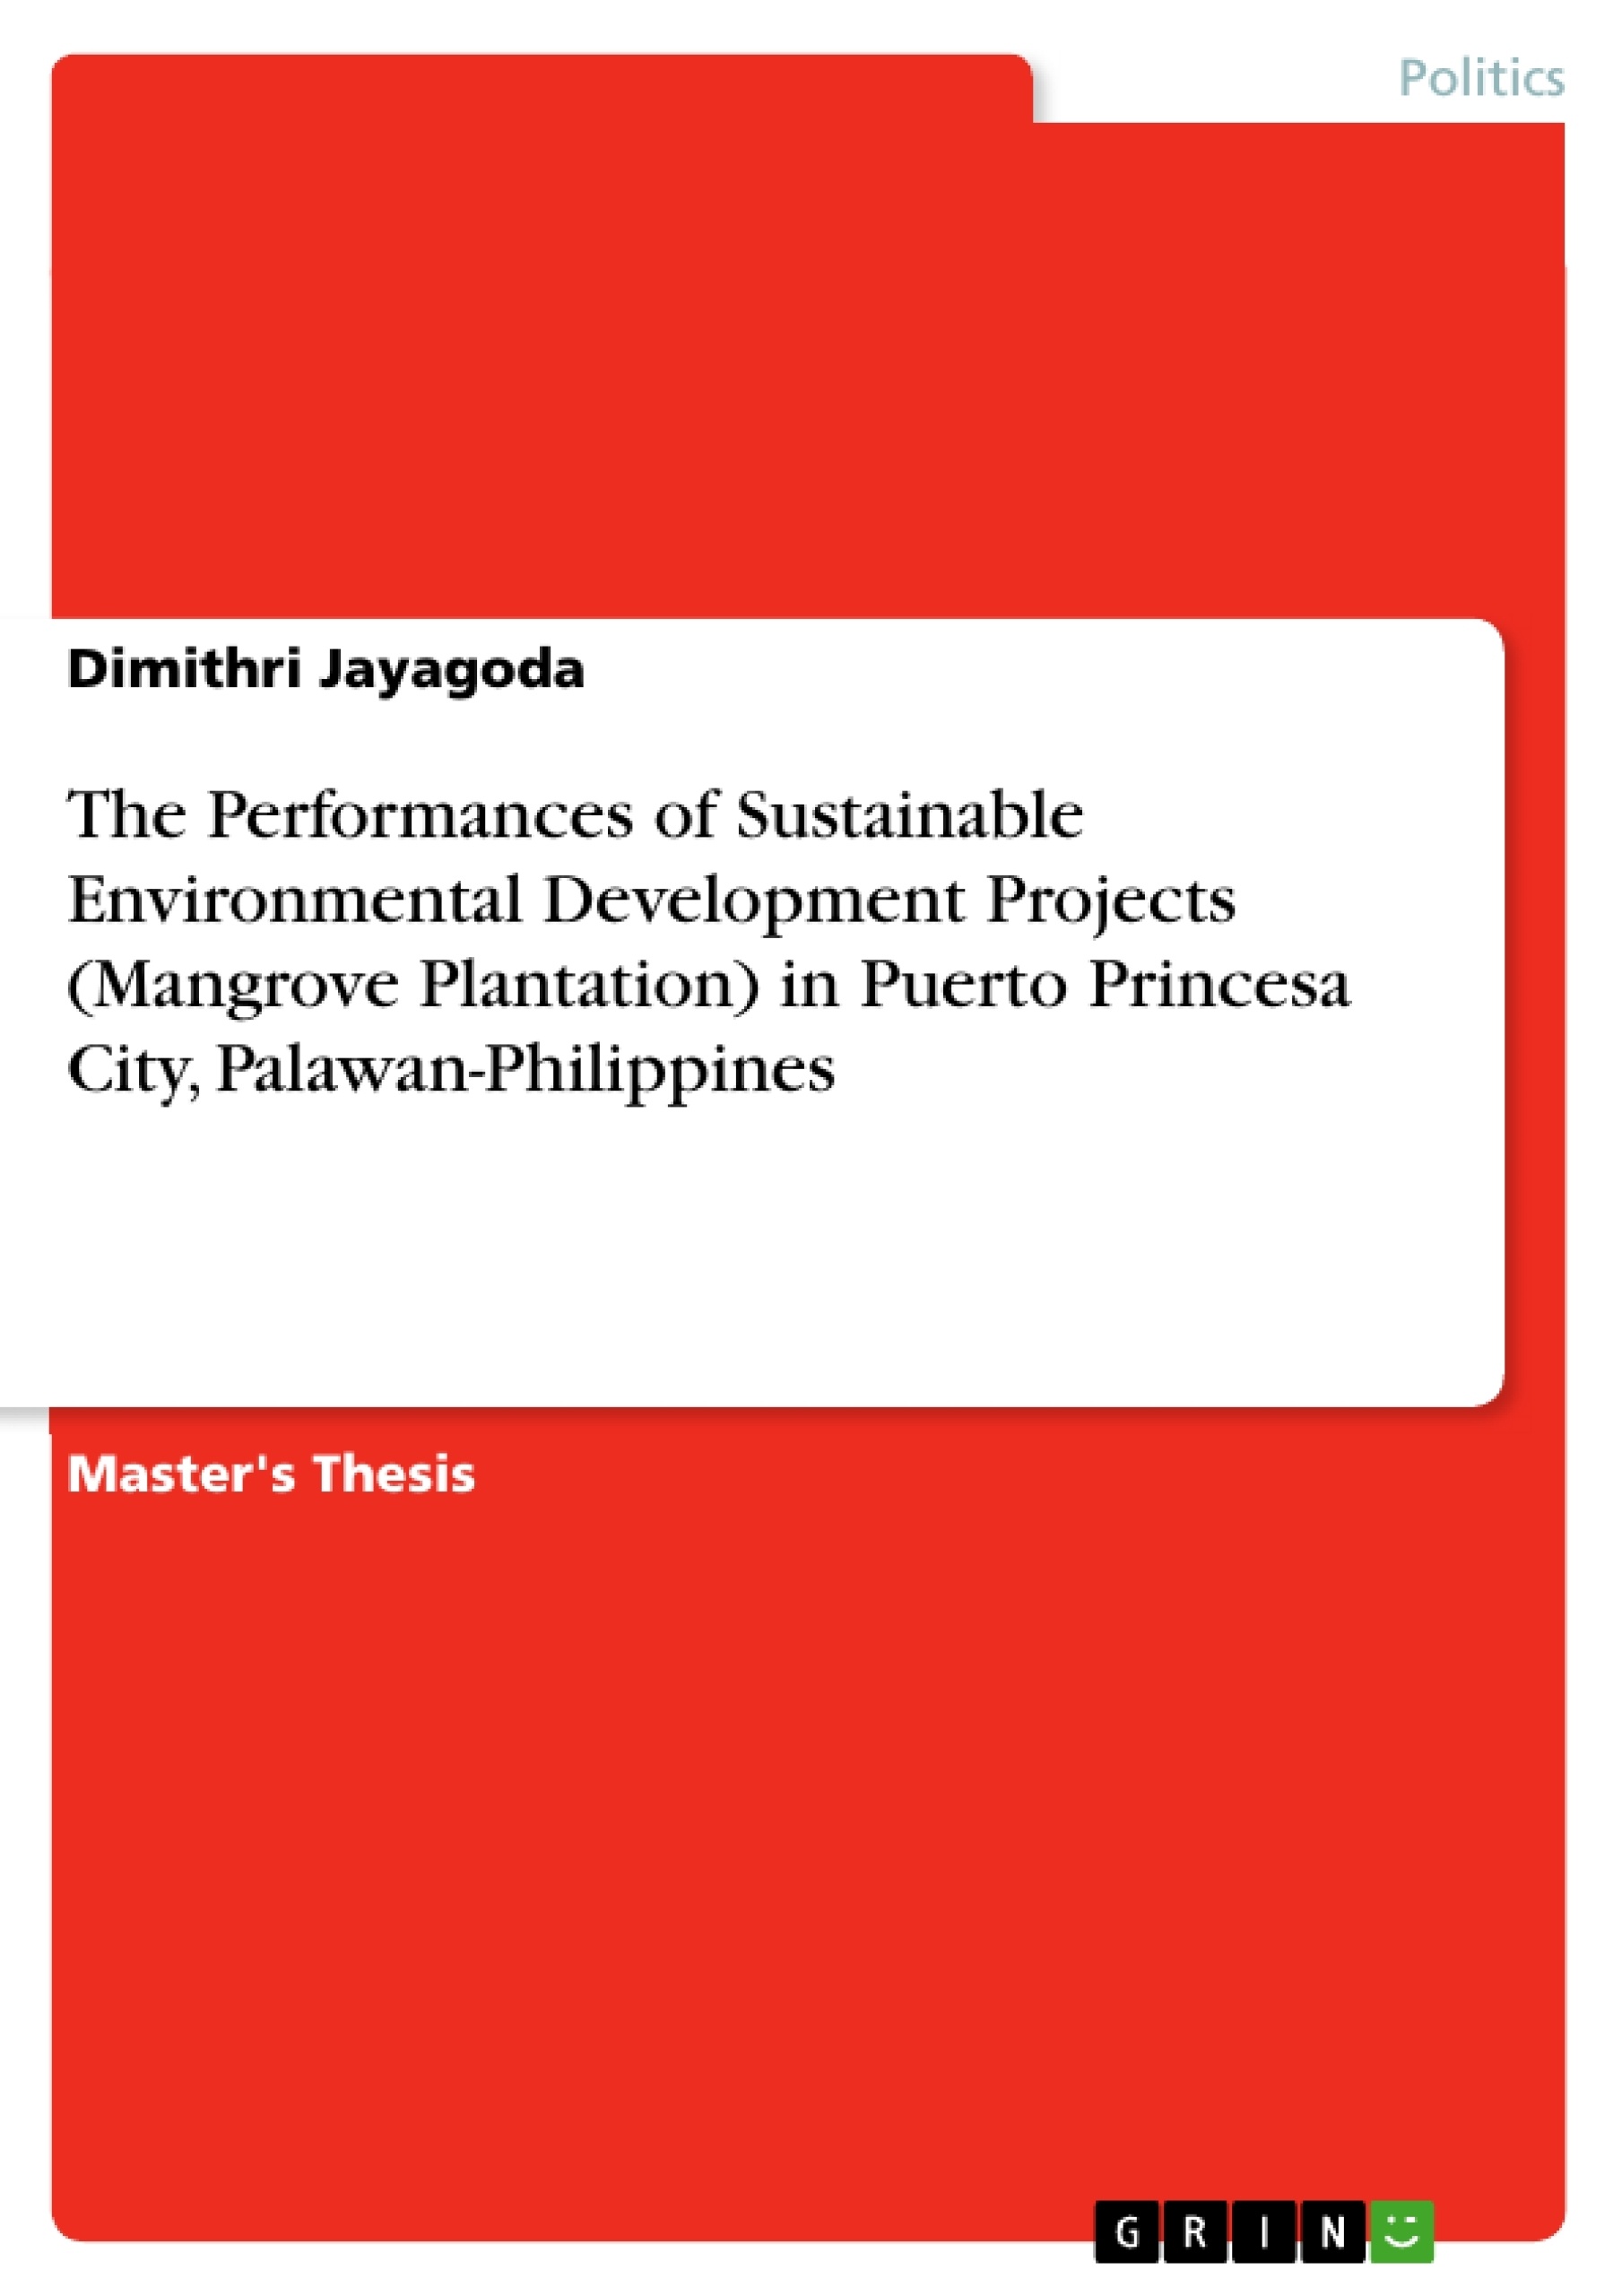 Title: The Performances of Sustainable Environmental Development Projects (Mangrove Plantation) in Puerto Princesa City, Palawan-Philippines